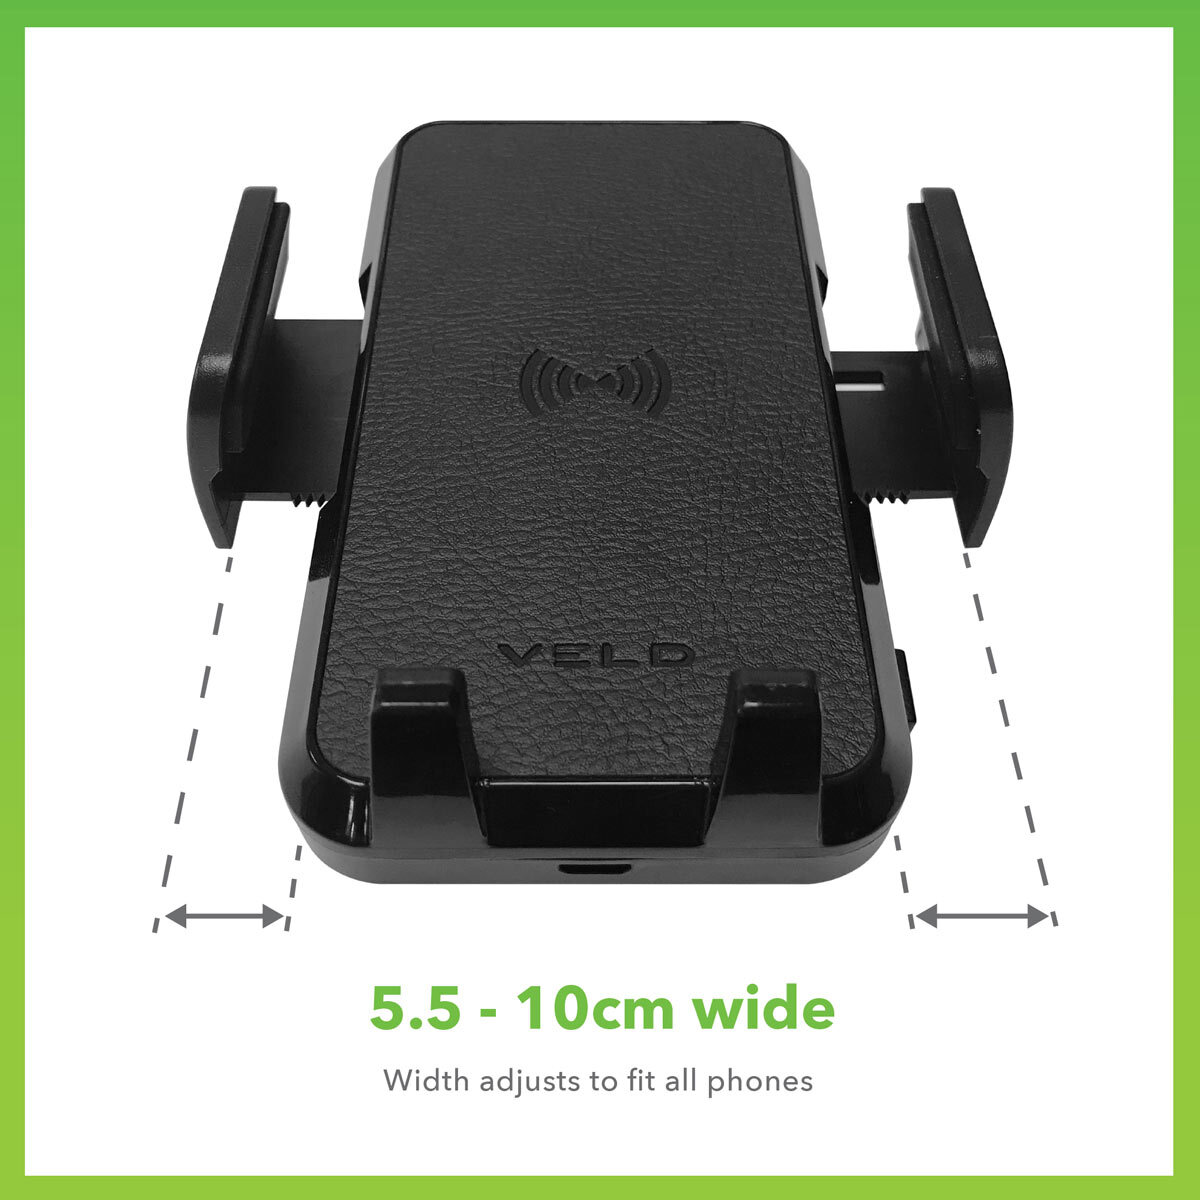 Buy Veld Wireless Car Charger with Super Fast in Car Charger USB Port x 2 at Costco.co.uk